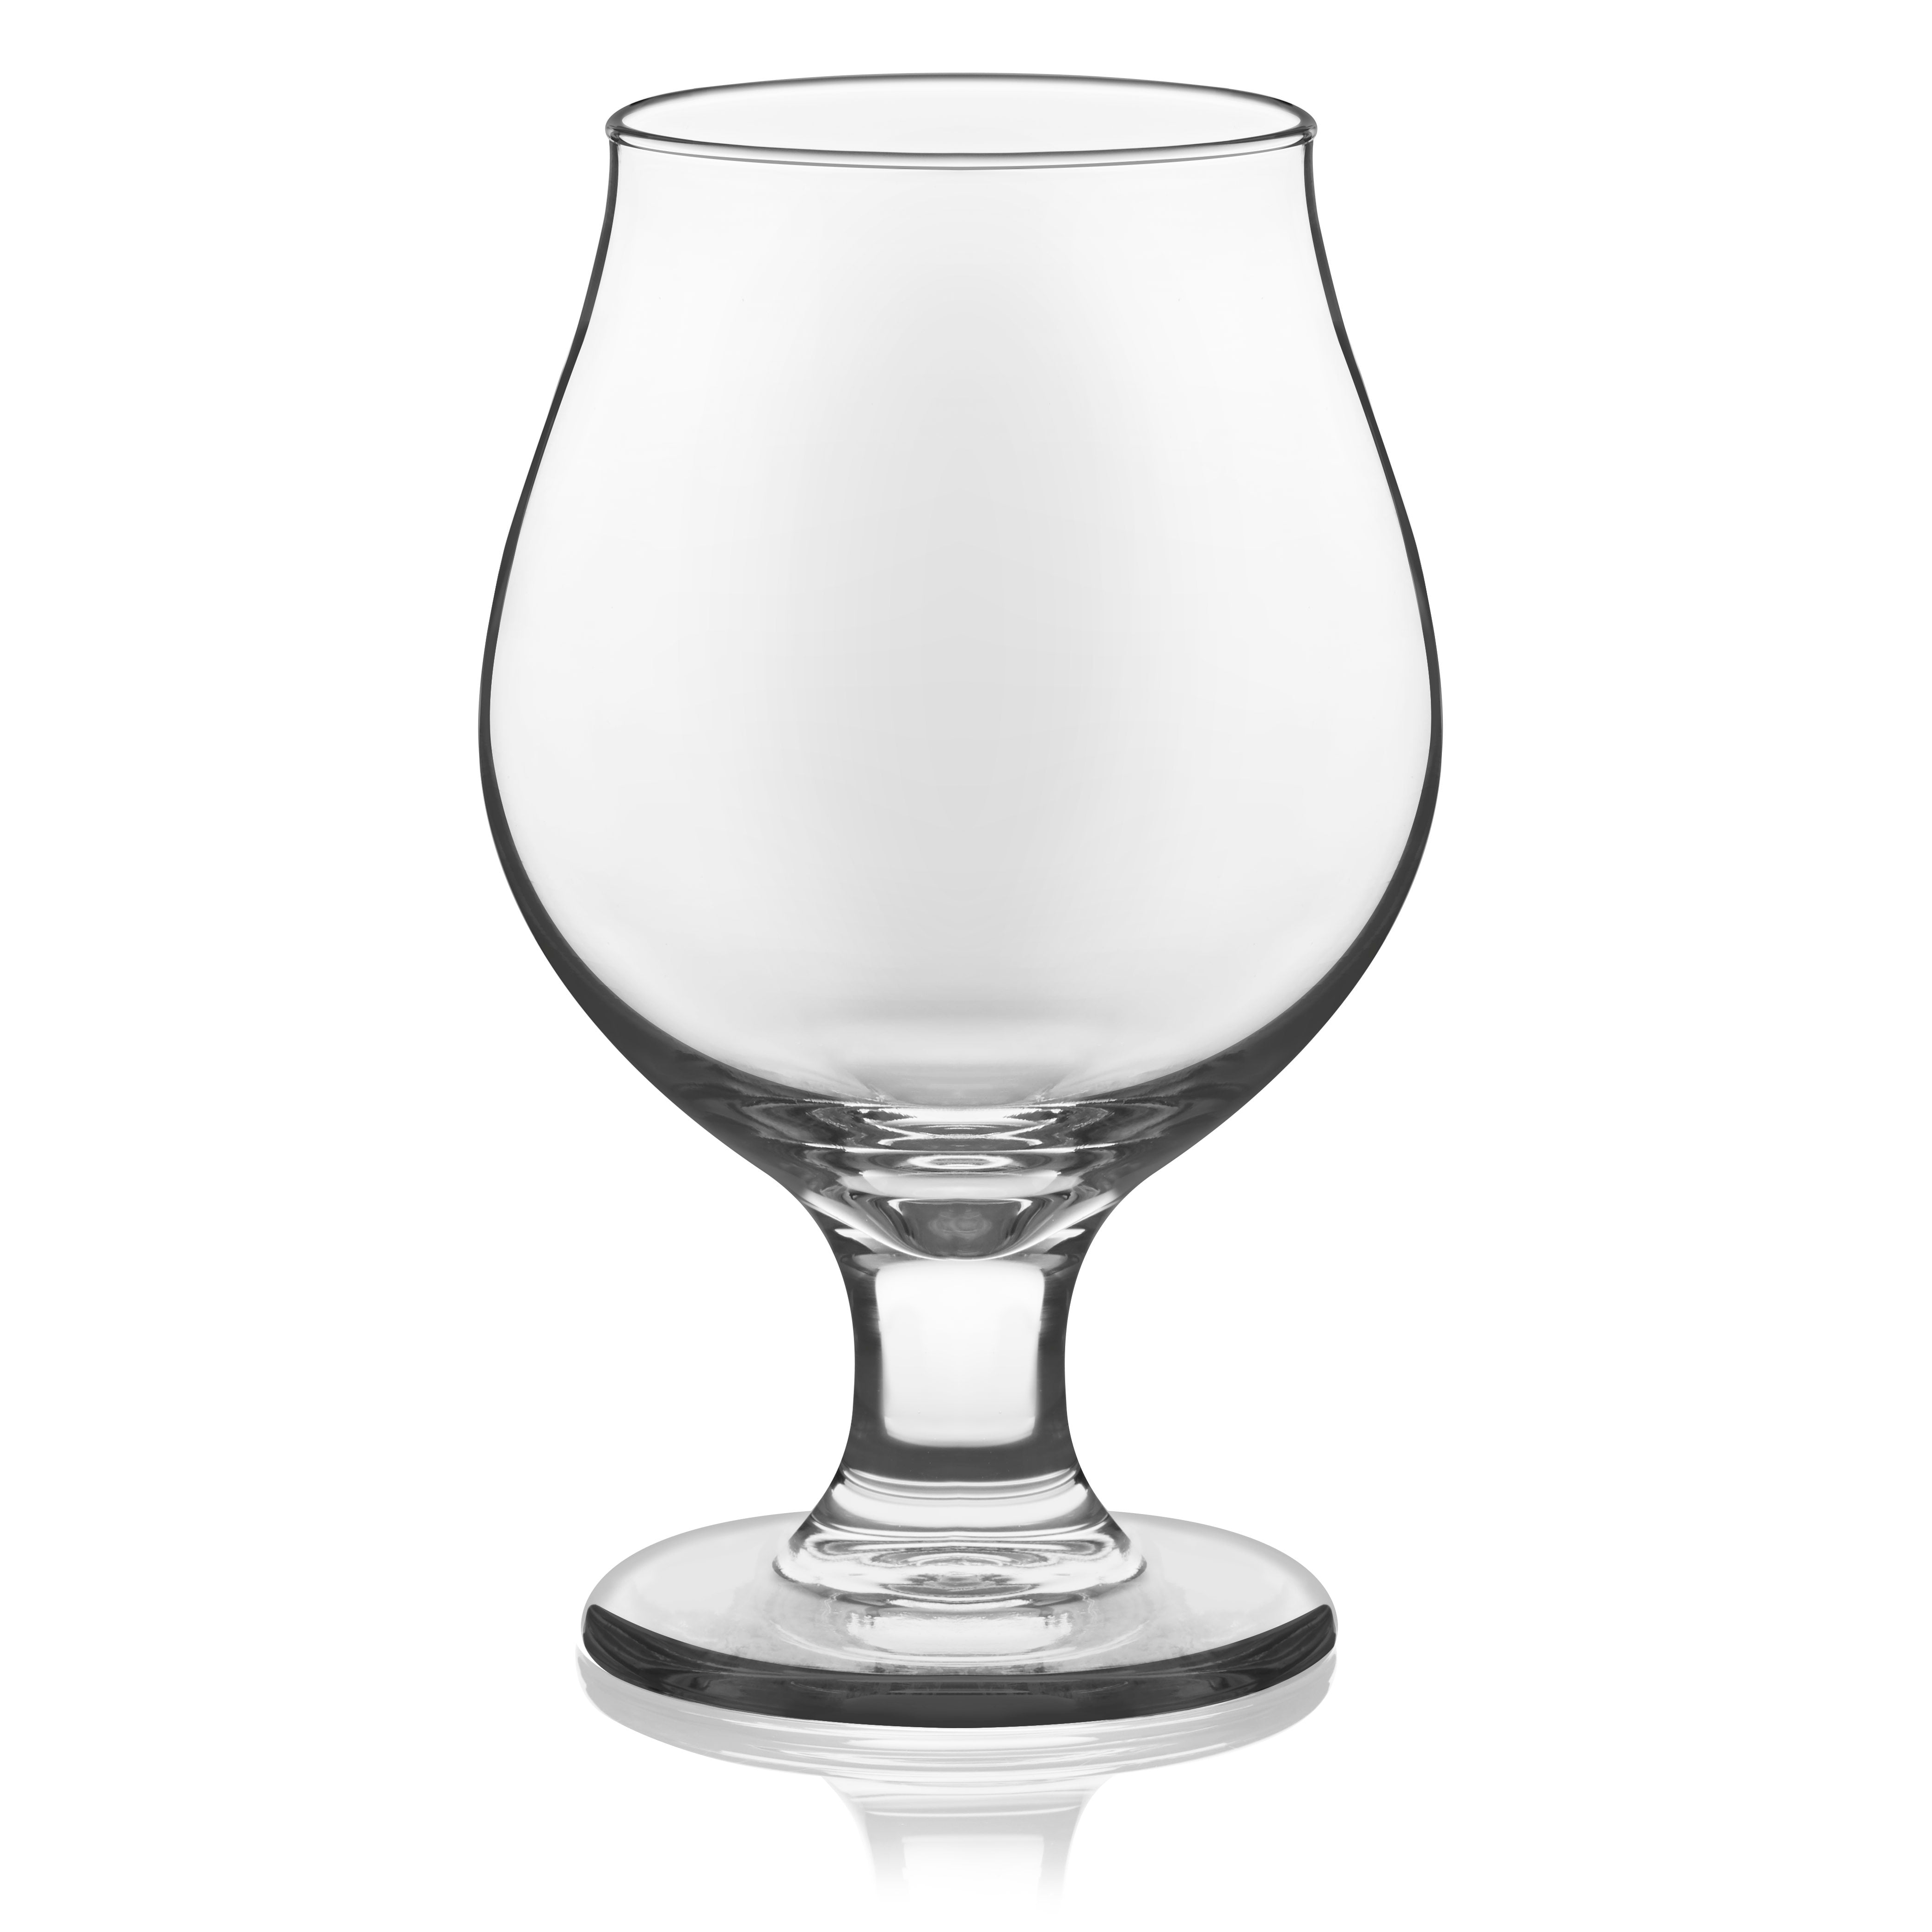 Restaurantware 16 Ounce Tulip Beer Glasses, Set of 6 Fine-Blown Stout Beer Glasses - Tulip-Style, Tempered, Clear Glass Craft Beer Glasses